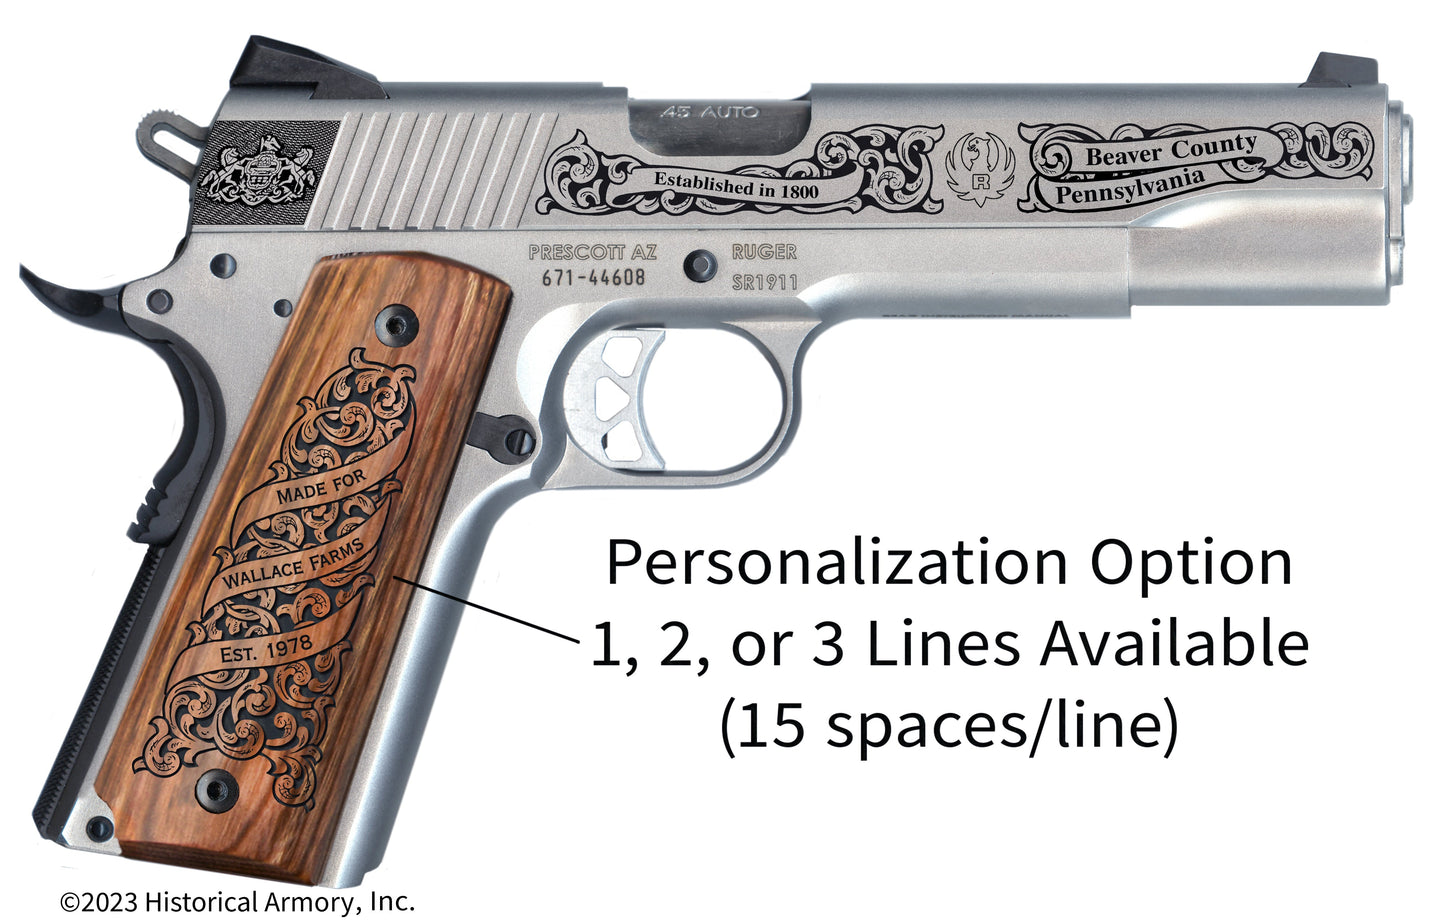 Beaver County Pennsylvania Personalized Engraved .45 Auto Ruger 1911